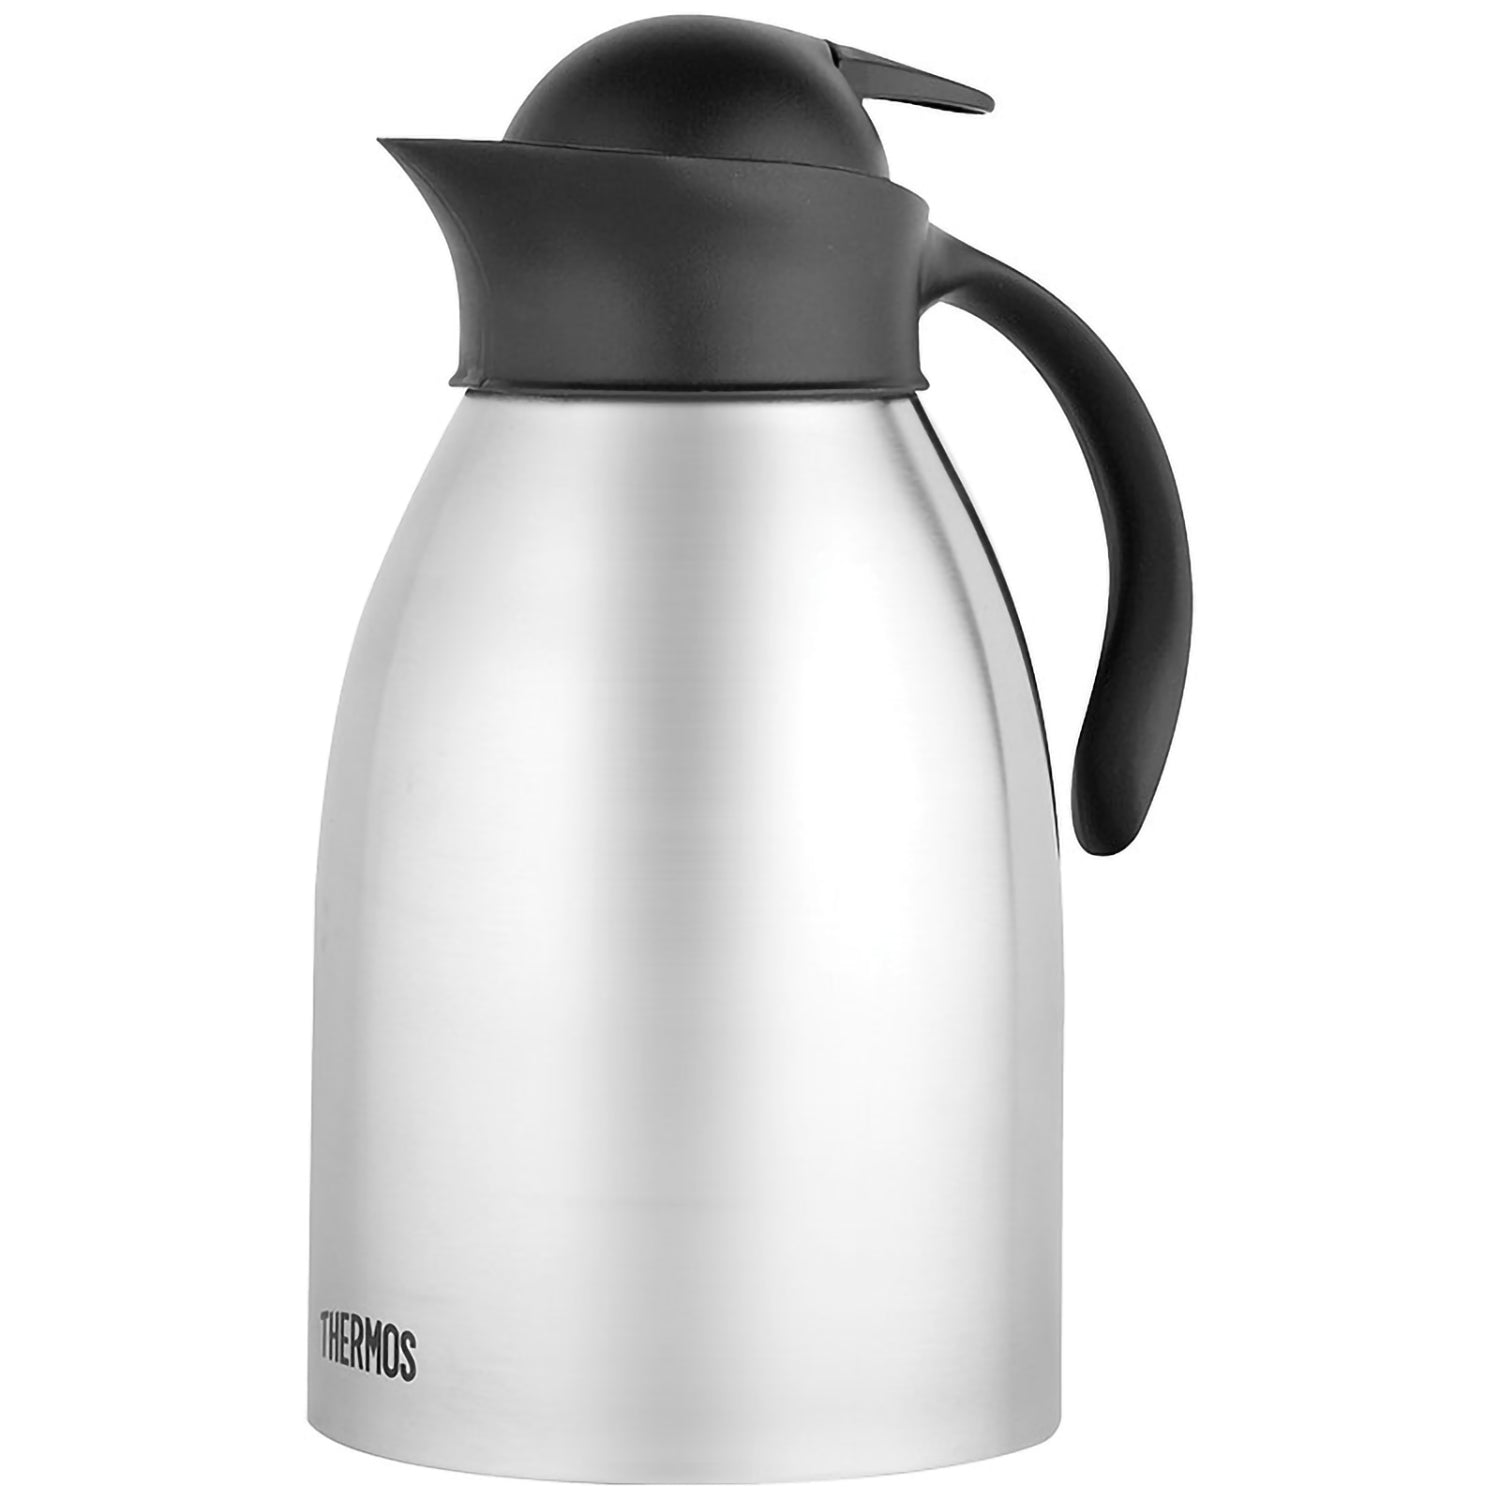 Thermos Vacuum Stainless Carafe - Stainless Steel 1.5L (51 oz)